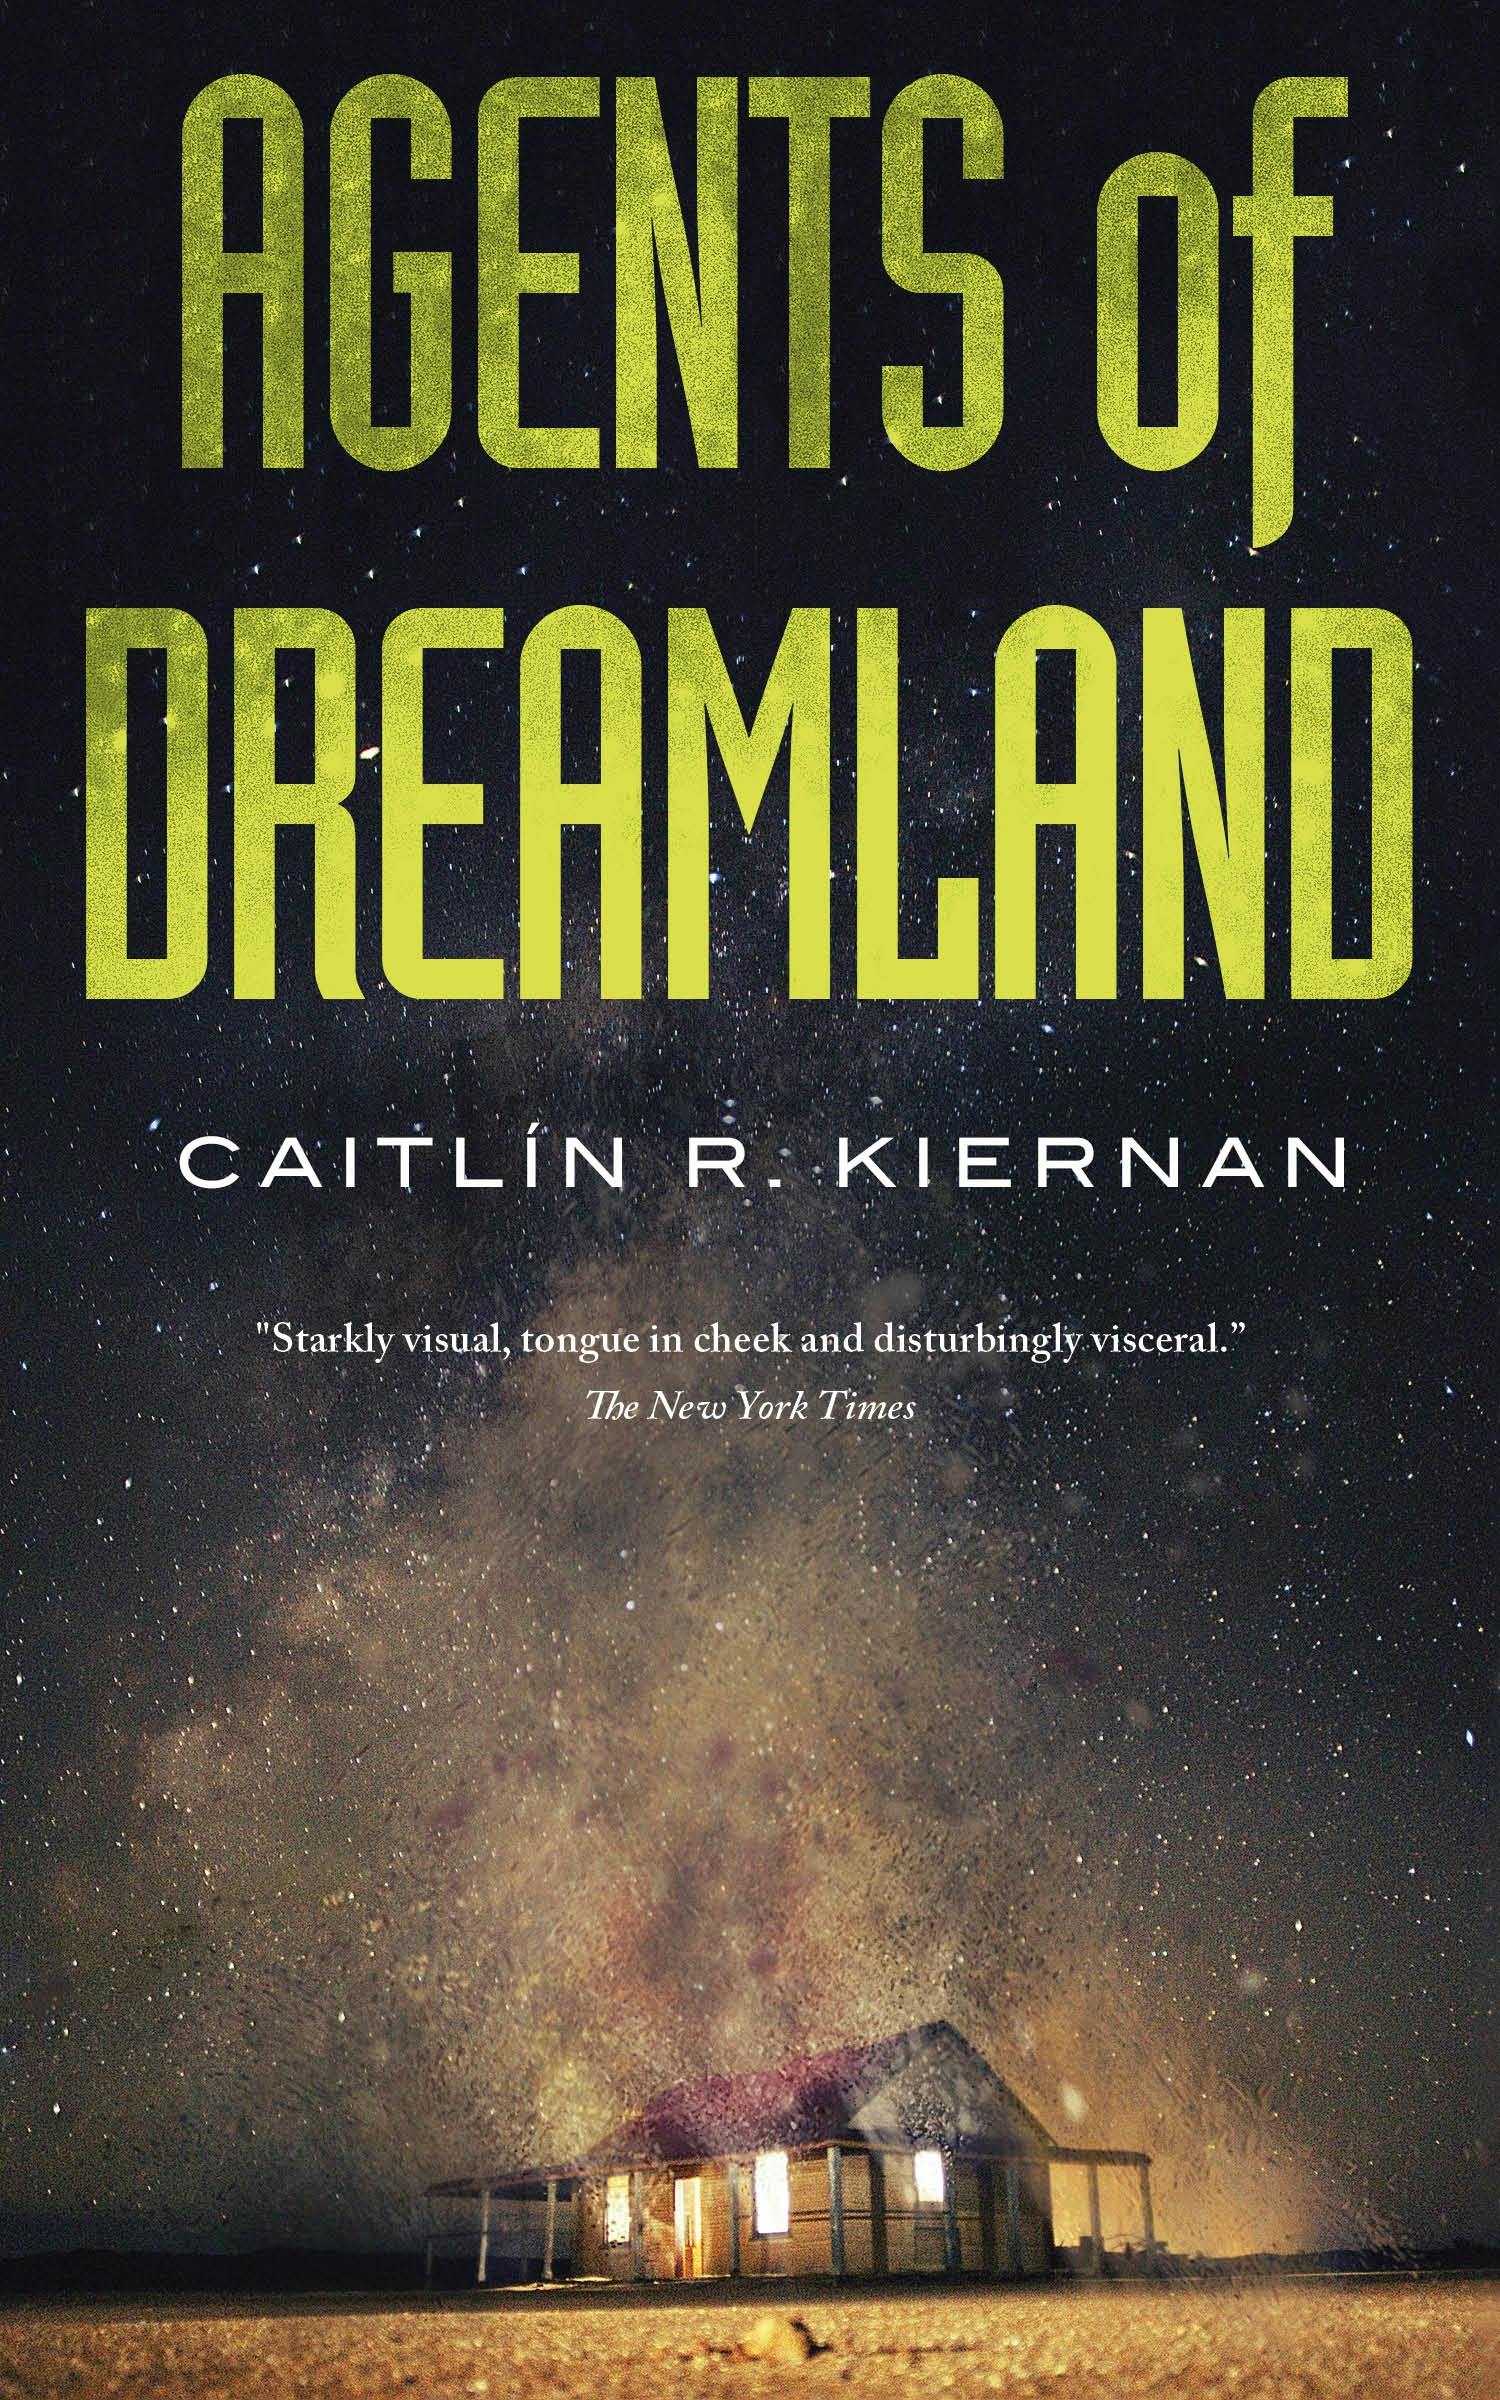 Image of Agents of Dreamland